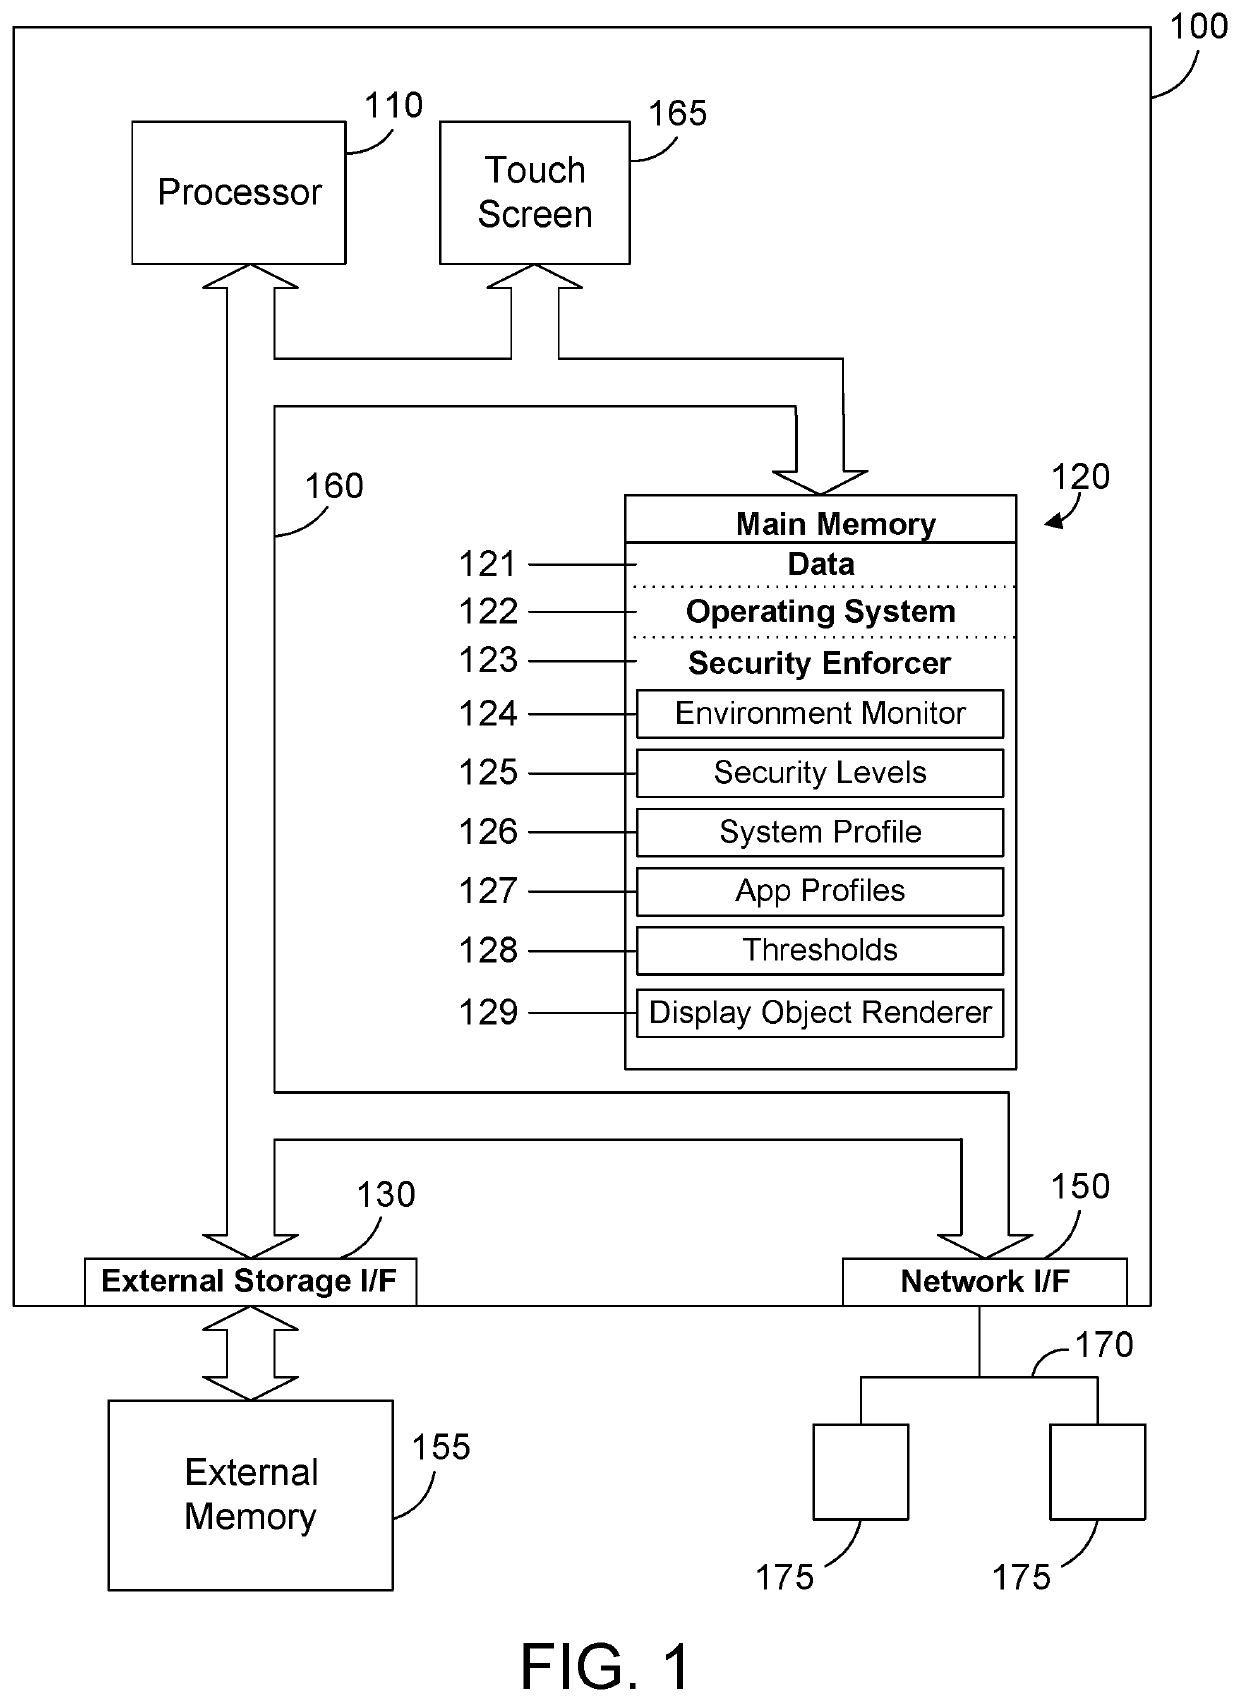 Enhancing security of a touch screen device